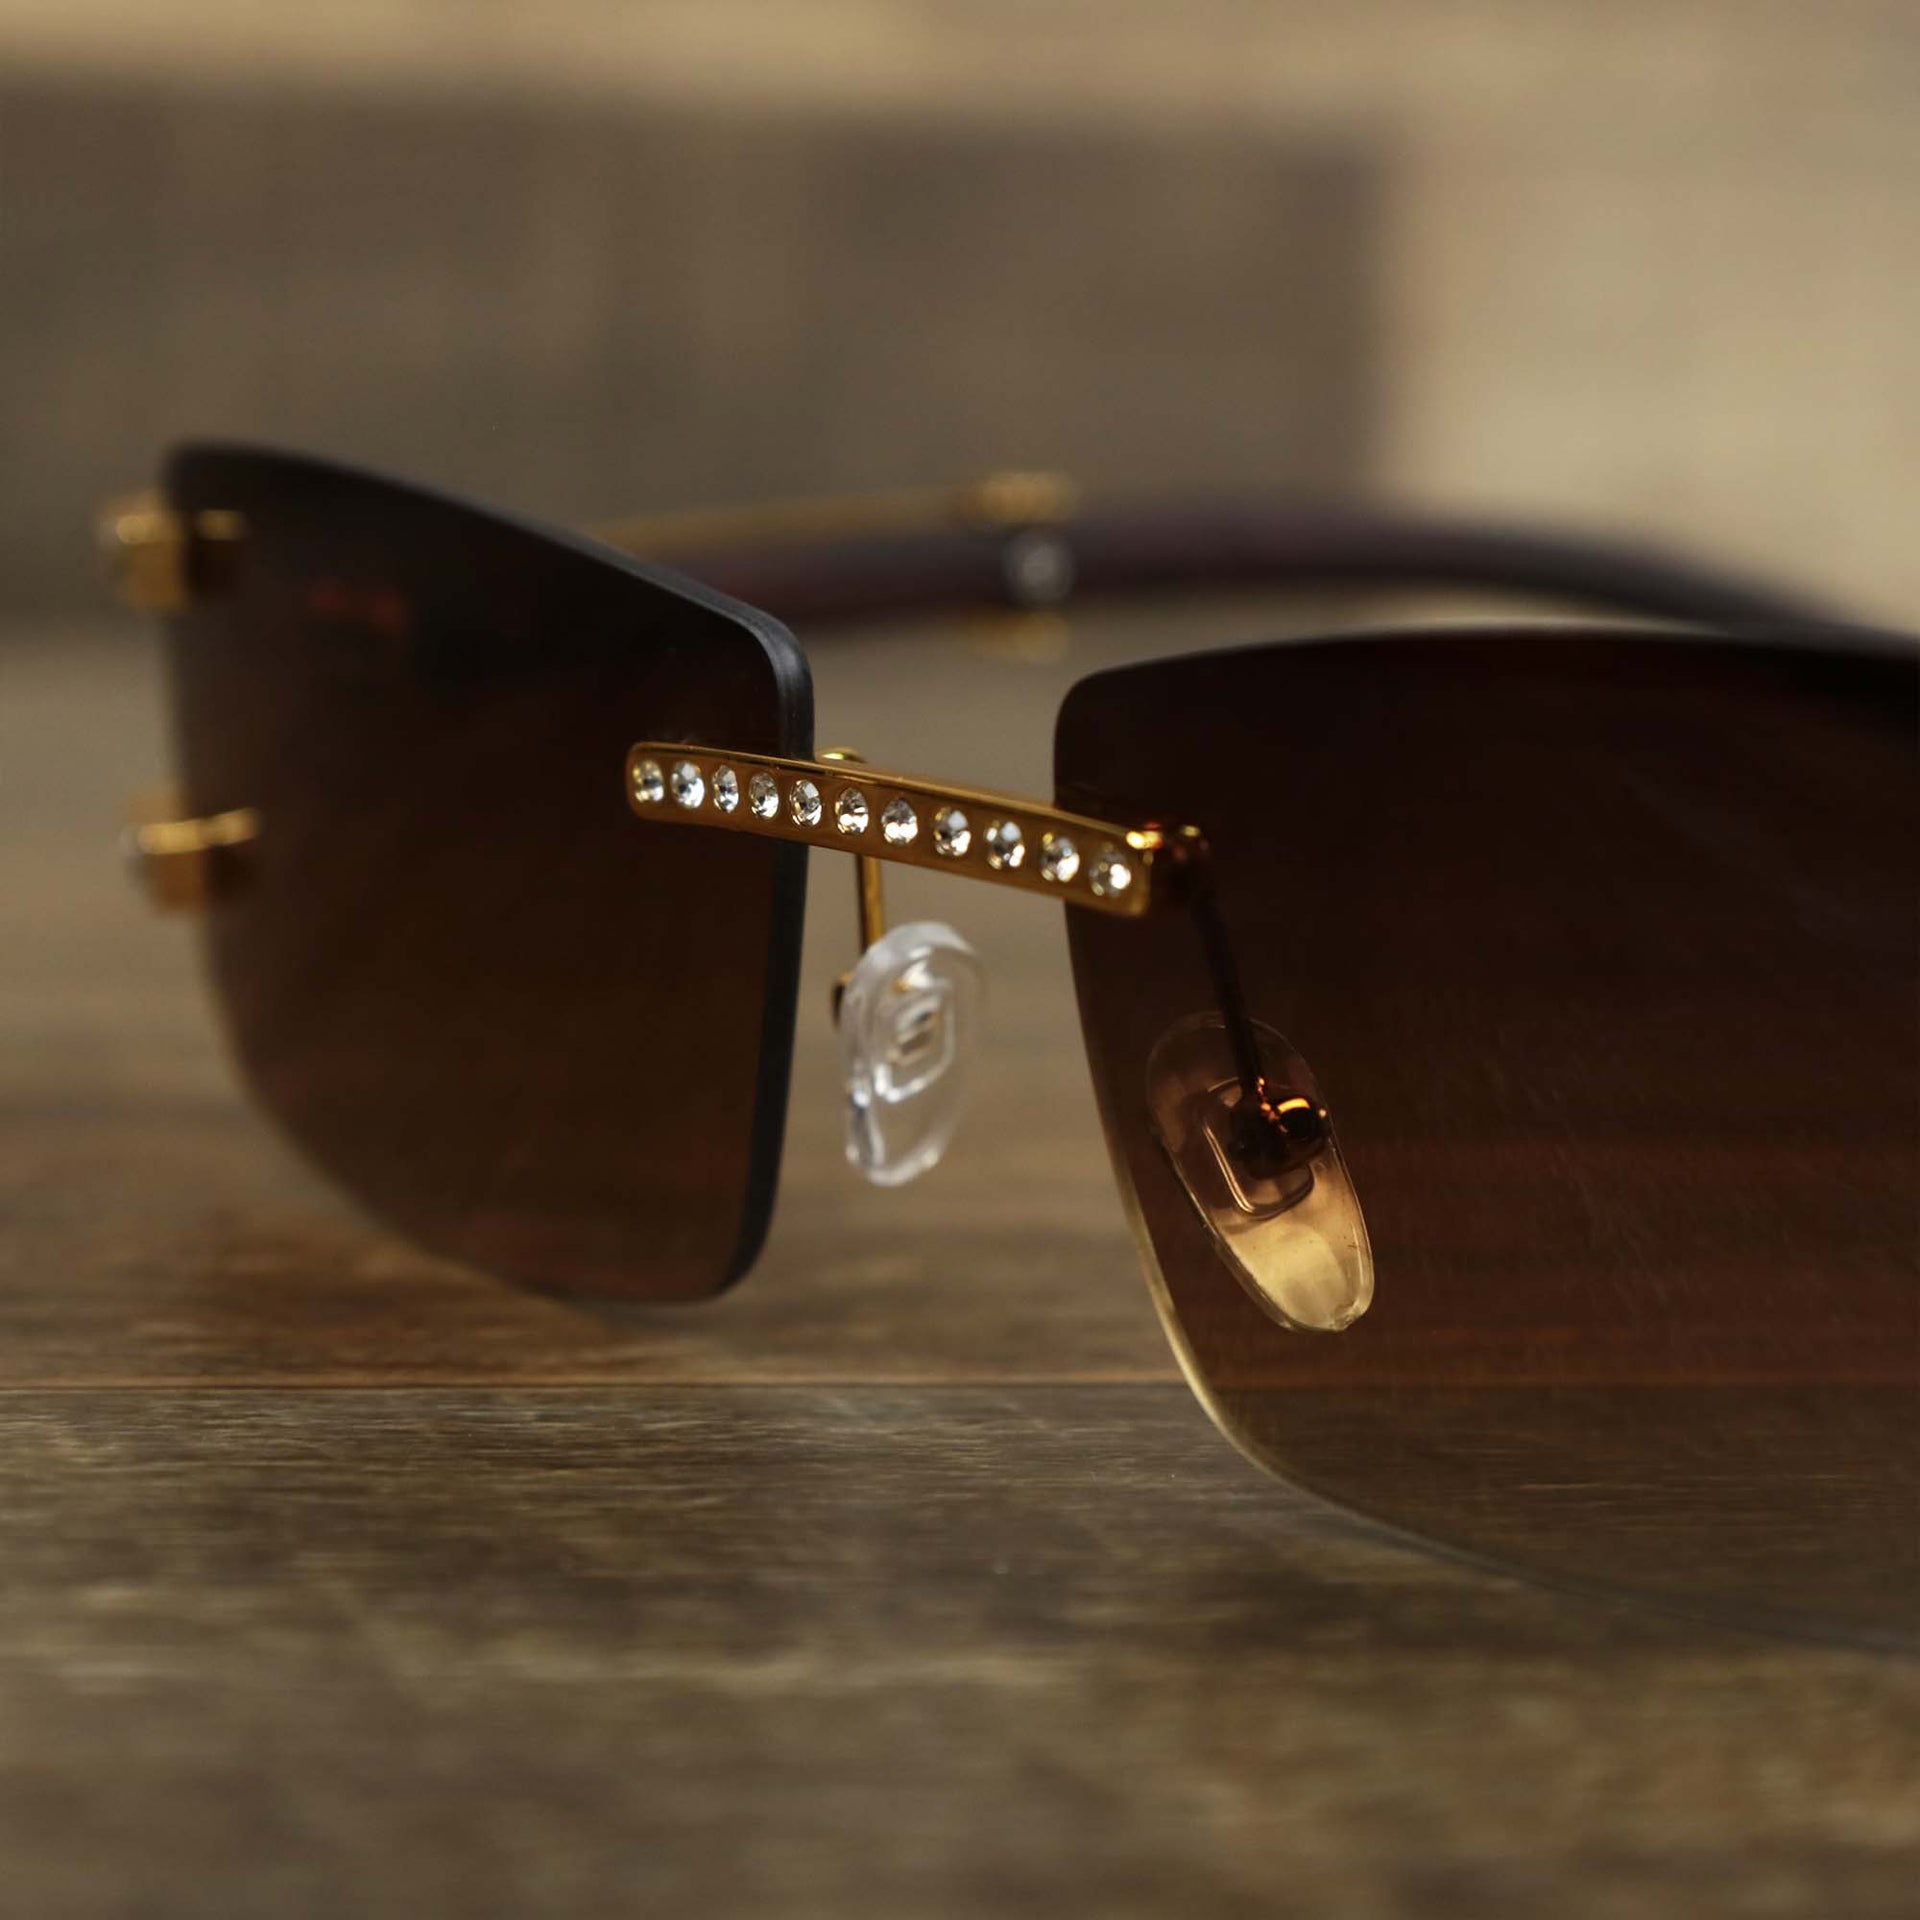 The bridge of the Rectangle Frames Brown Gradient Lens Flooded Sunglasses with Gold Frame